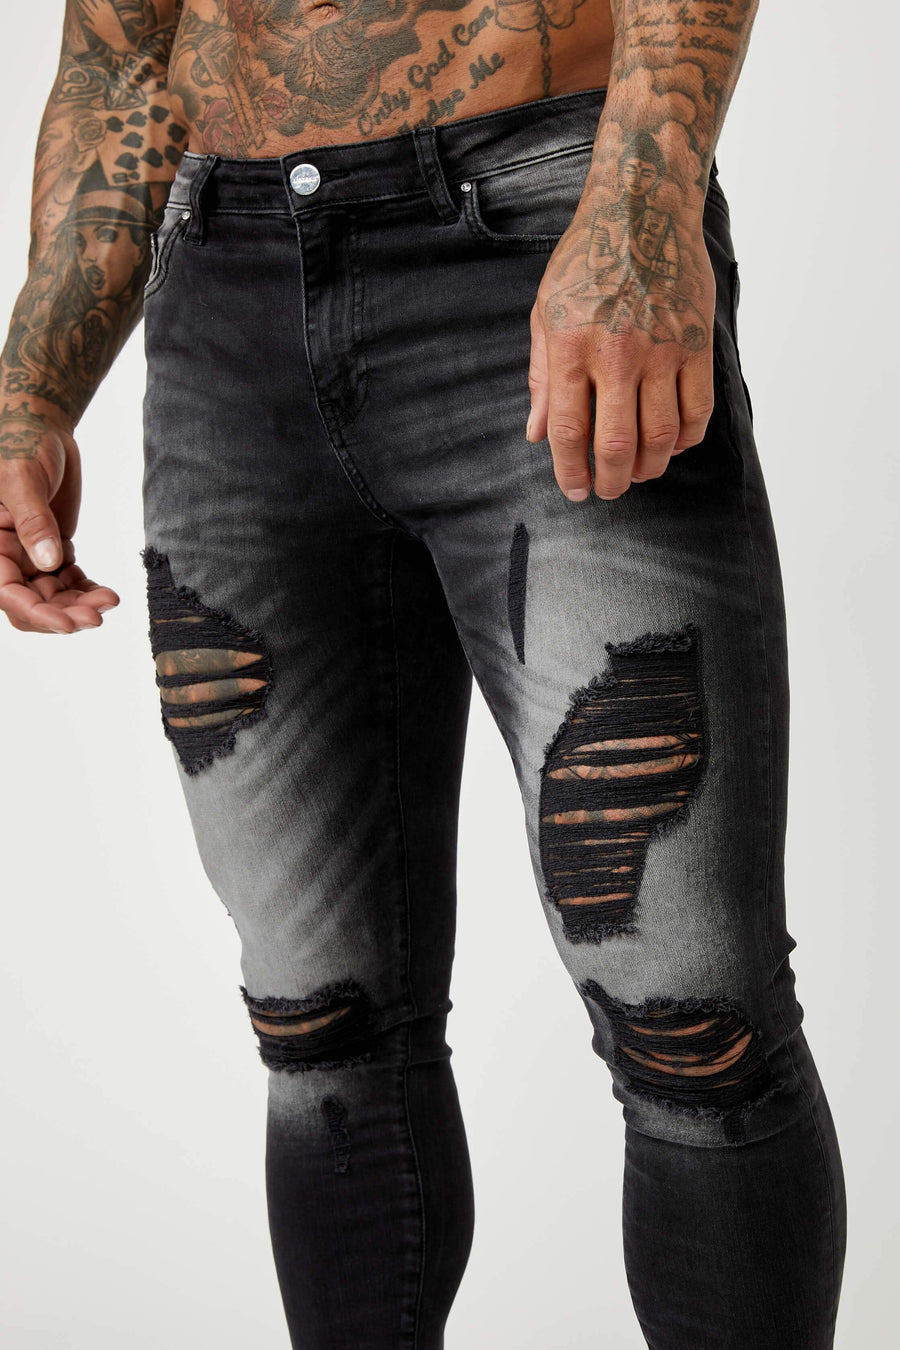 Legend London Jeans PREMIUM SPRAY-ON FIT JEANS - GREY WASHED RIPPED & REPAIRED